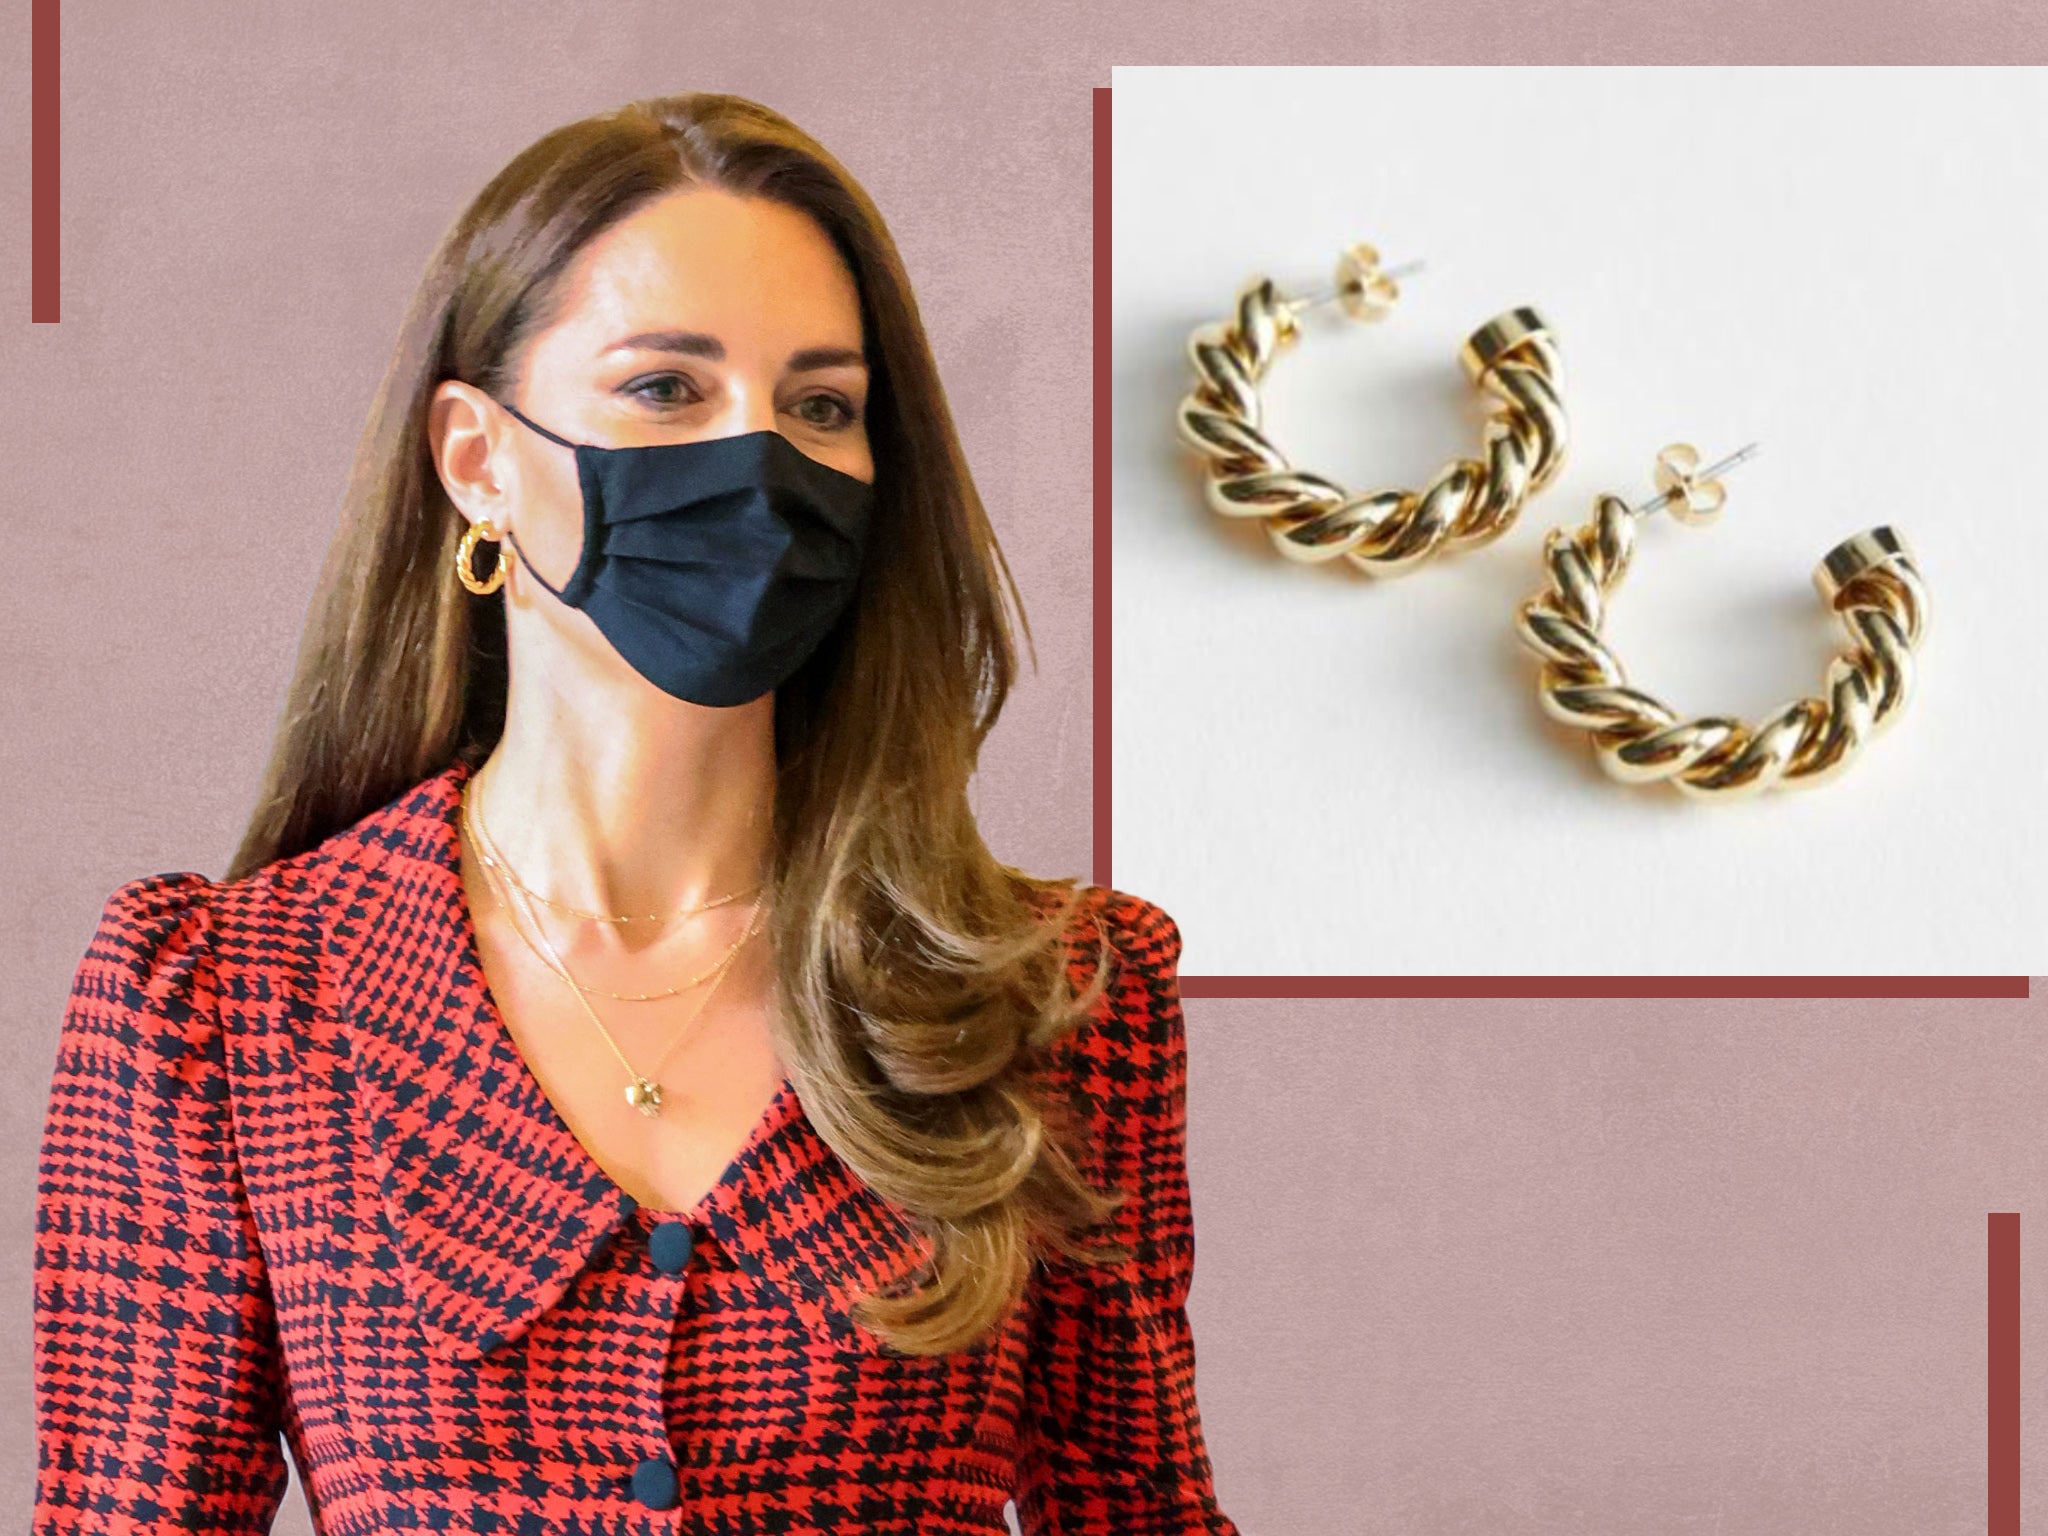 We predict a sellout, so be quick snapping up a pair of the £17 earrings